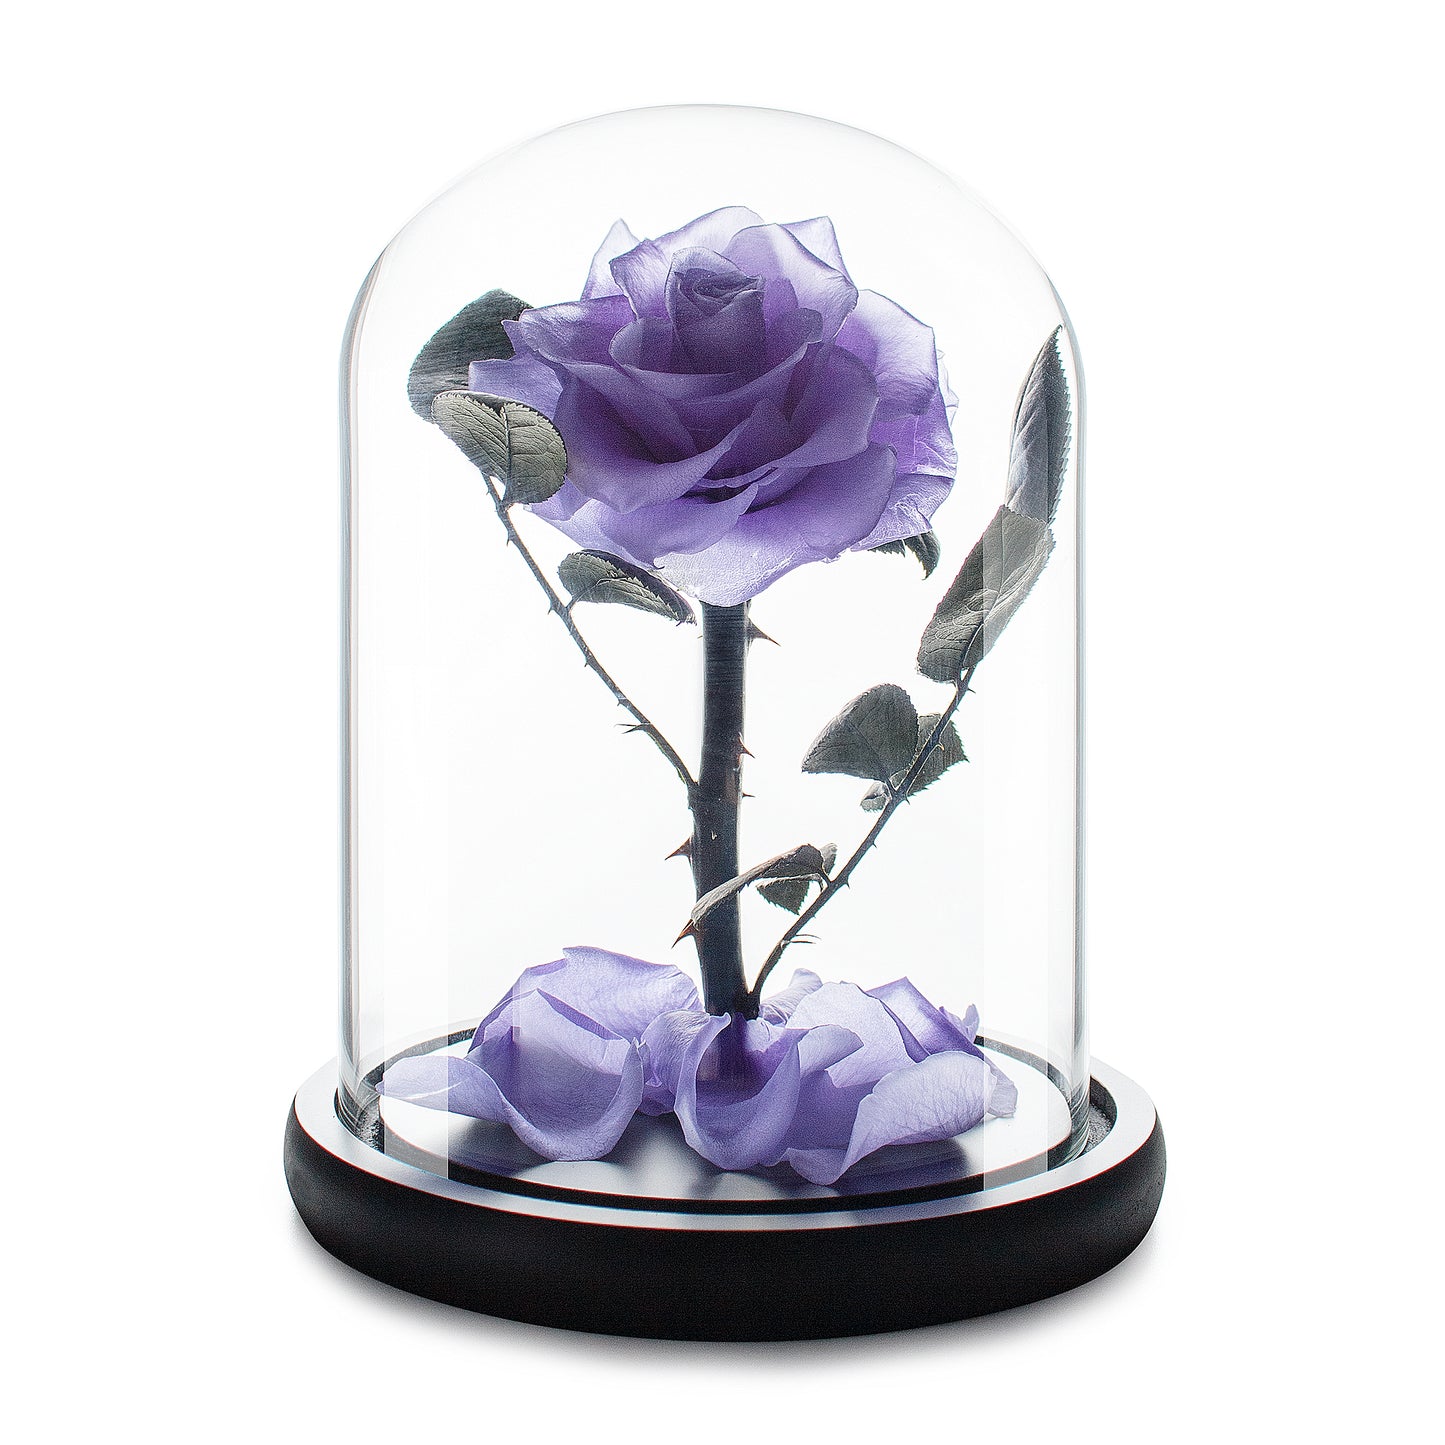 Violet Infinity Rose in Glass Dome